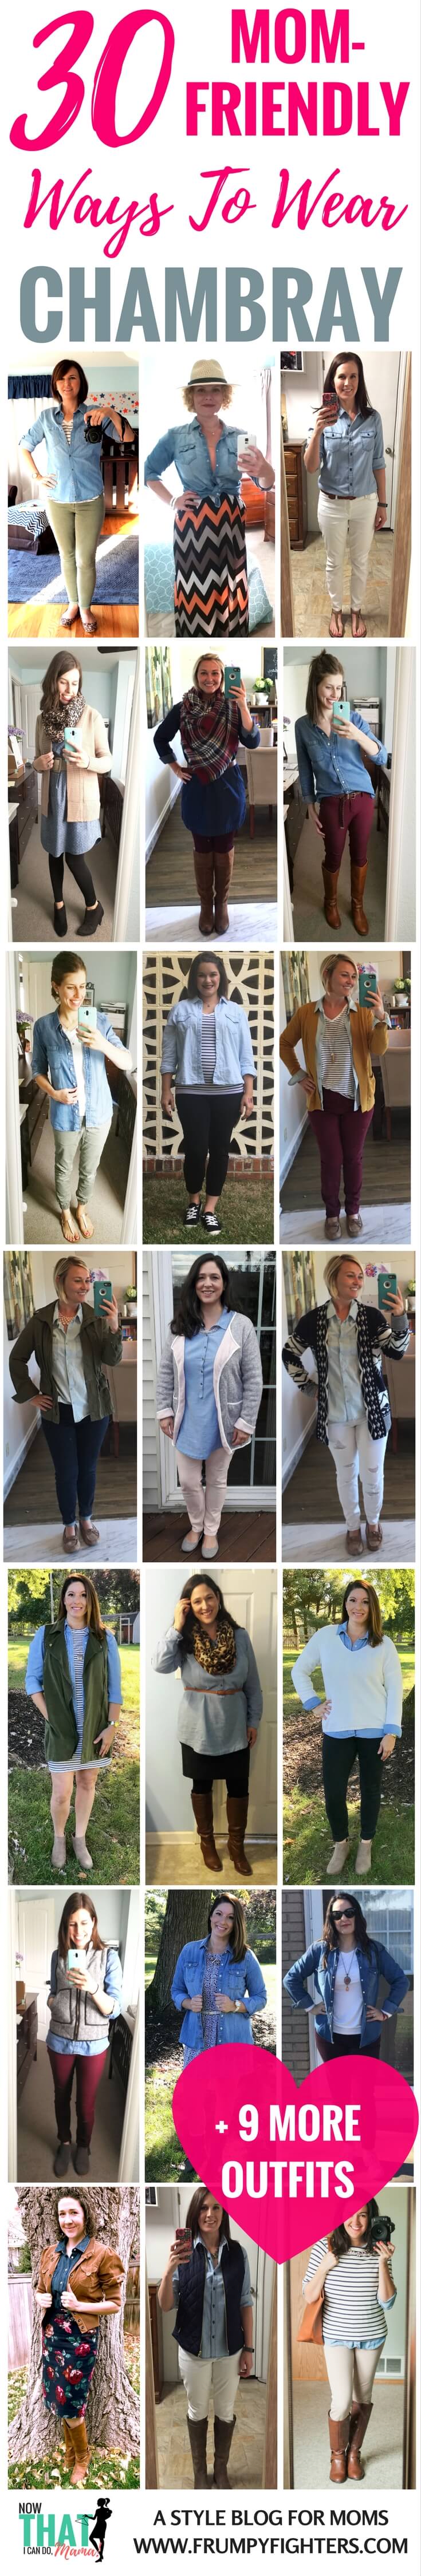 Tons of outfit ideas and ways to wear my chambray button-down shirt or denim dress... on lots of different mom models! Love these cute and chic ideas that are #modest and totally wearable. Whether cozy at home with the kids or running errands, these outfits are so easy to copy. Going to pin to reference in the morning! #momlife #fashion #style #clothes #fall #winter #spring #summer #outfits #chambray